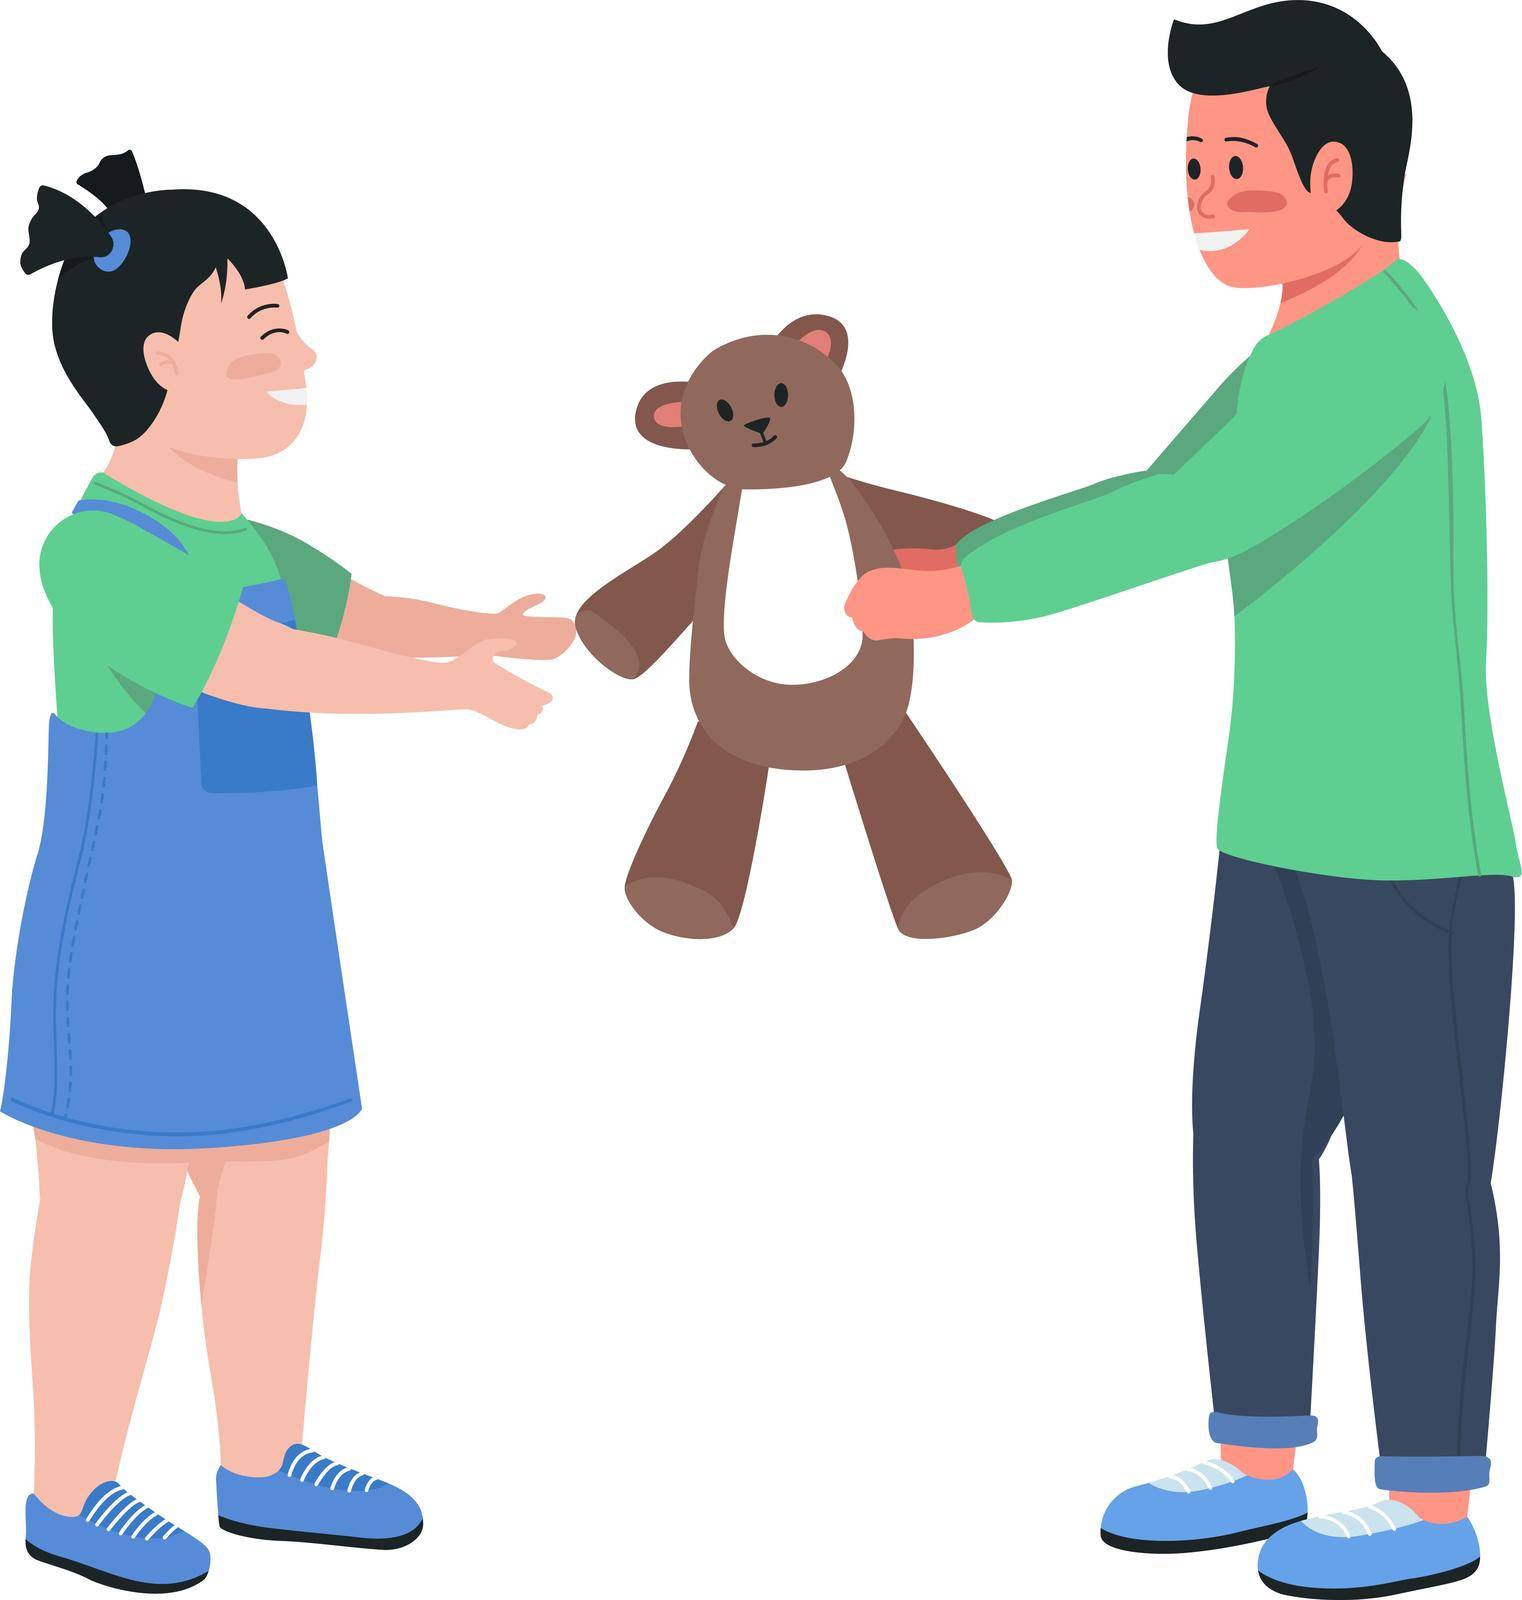 Preschool friends bonding semi flat color vector character. Posing figures. Full body people on white. Relationships isolated modern cartoon style illustration for graphic design and animation